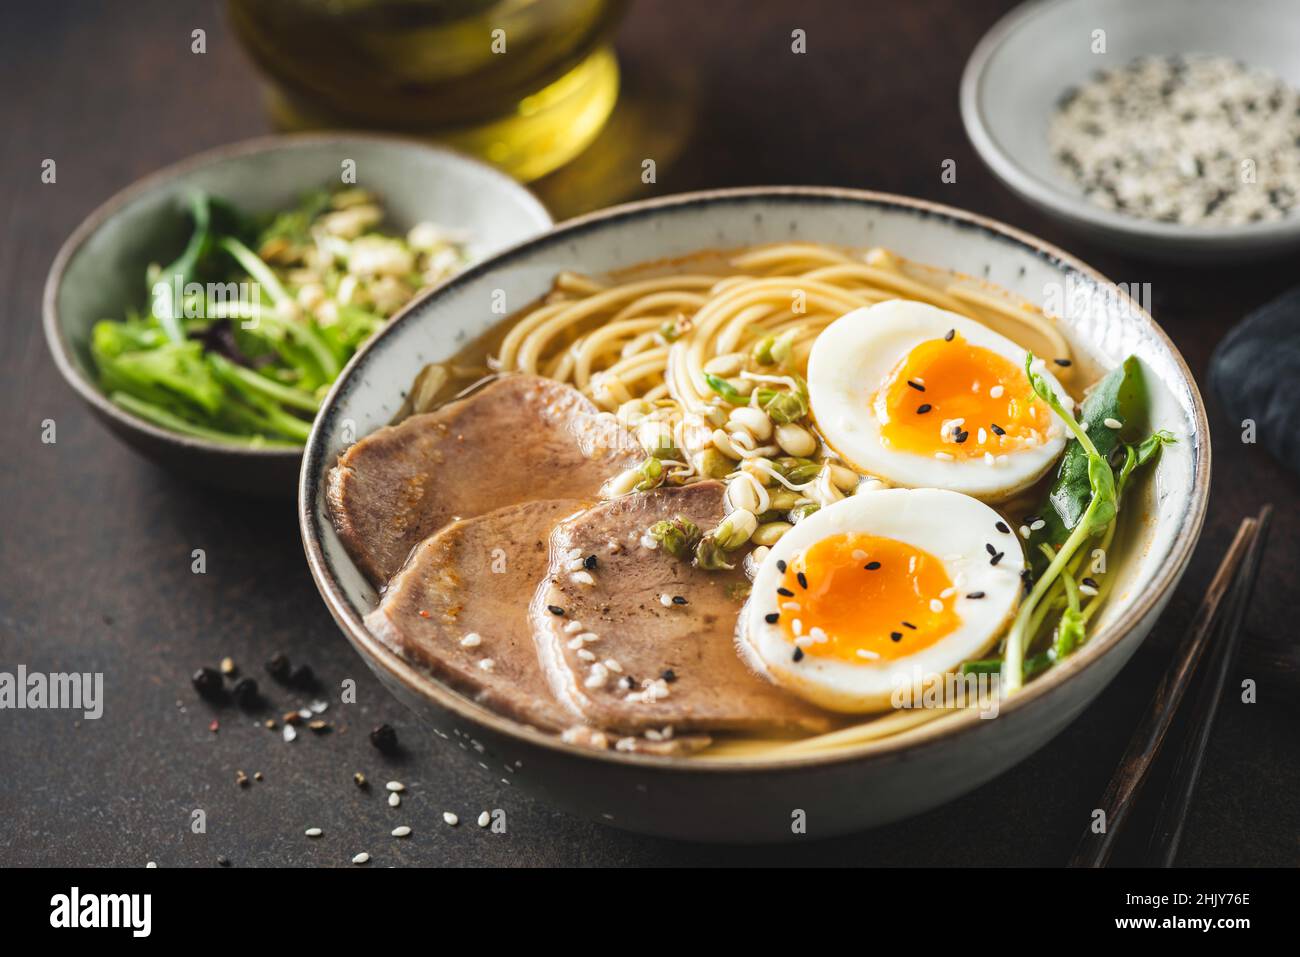 Ramen noodles soup bowl with egg and meat, closeup view Stock Photo